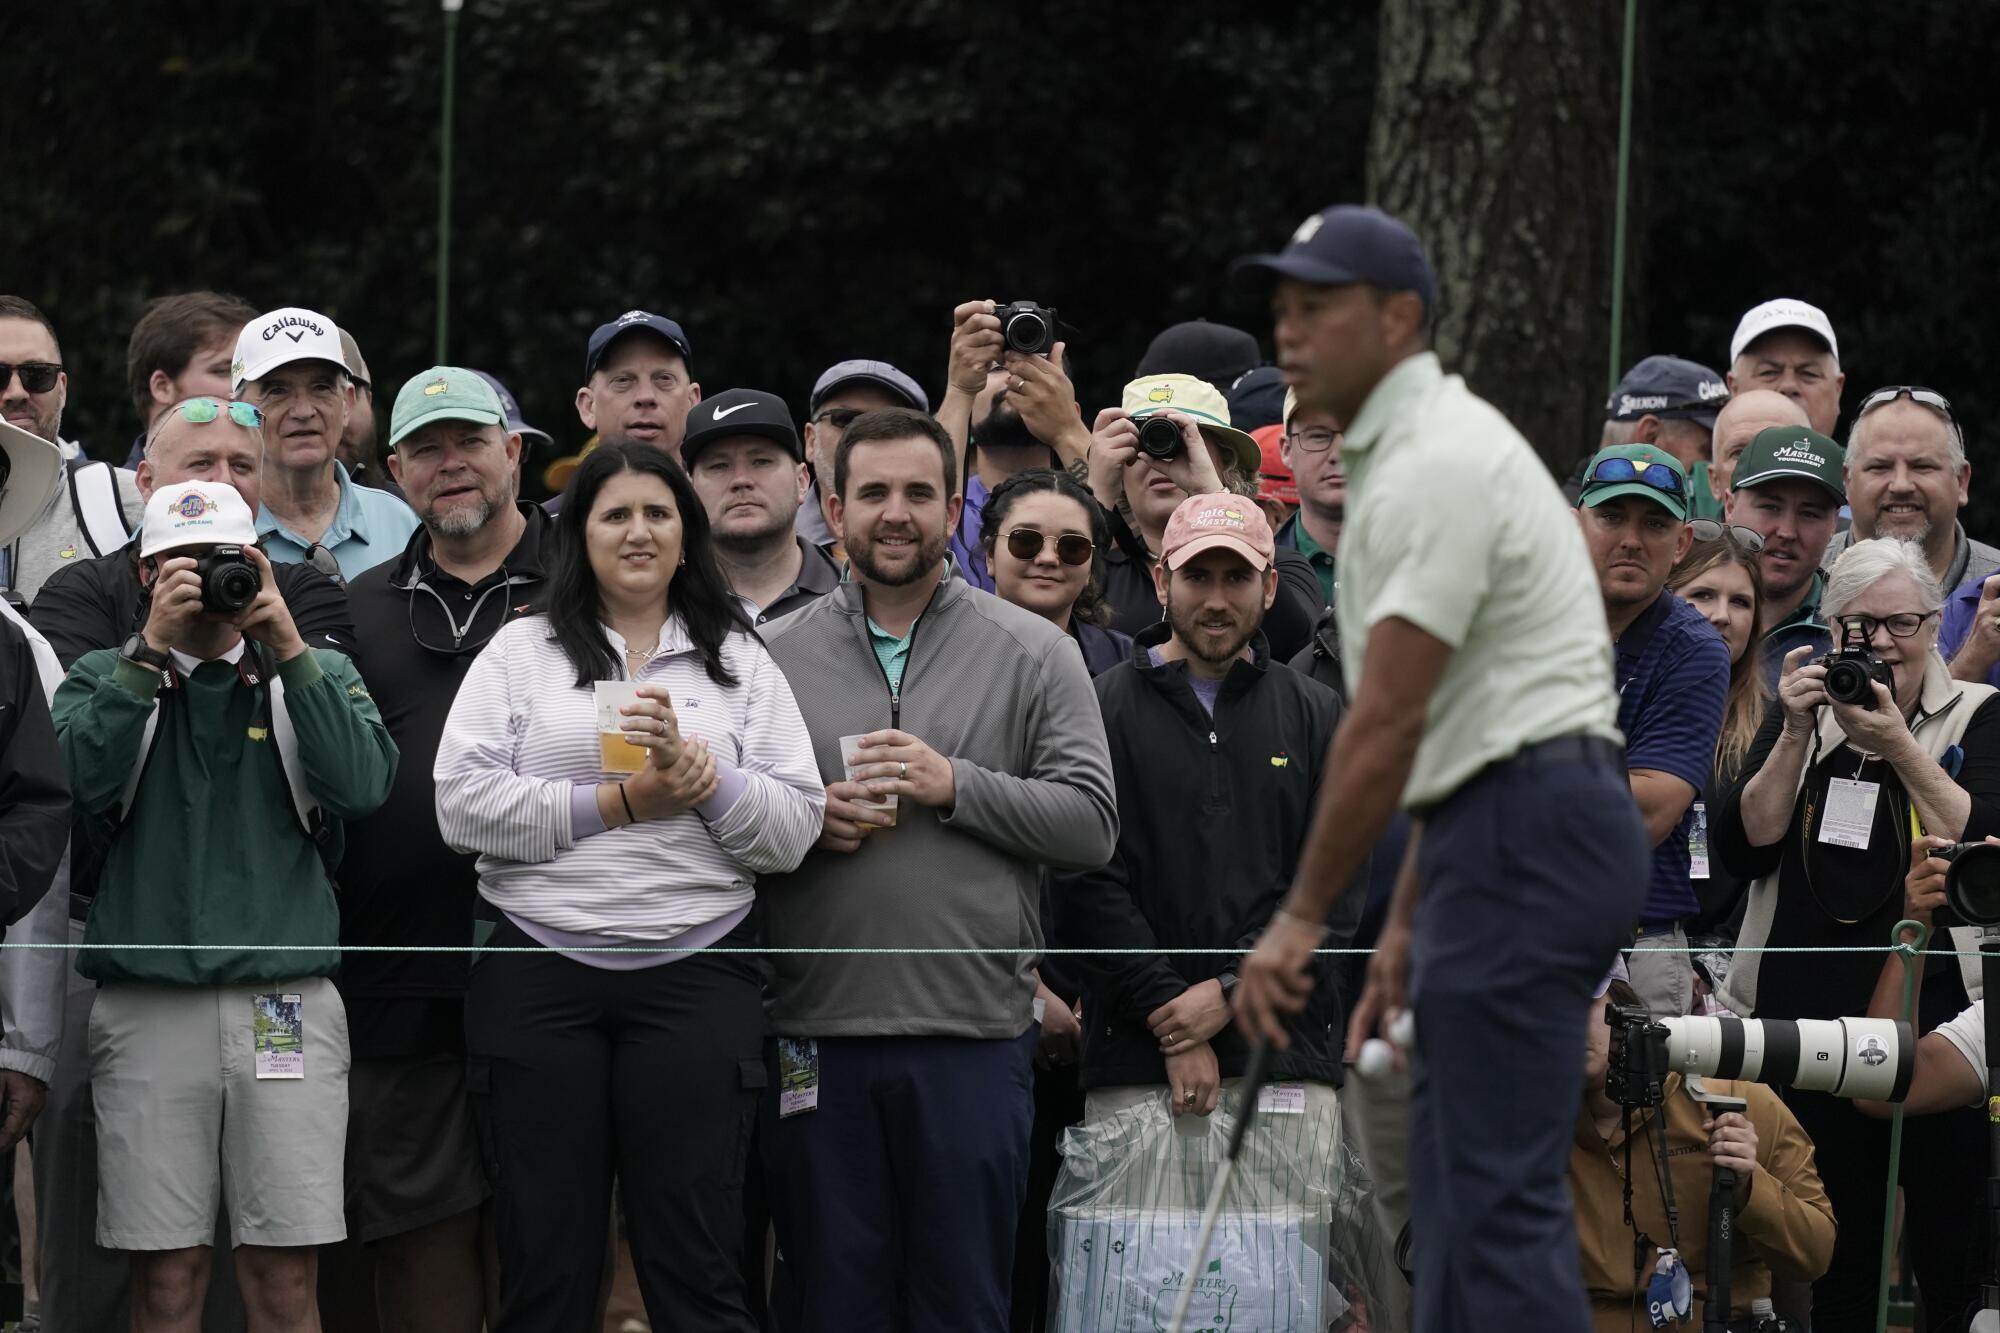 Spectators watch Tiger Woods on the driving range 